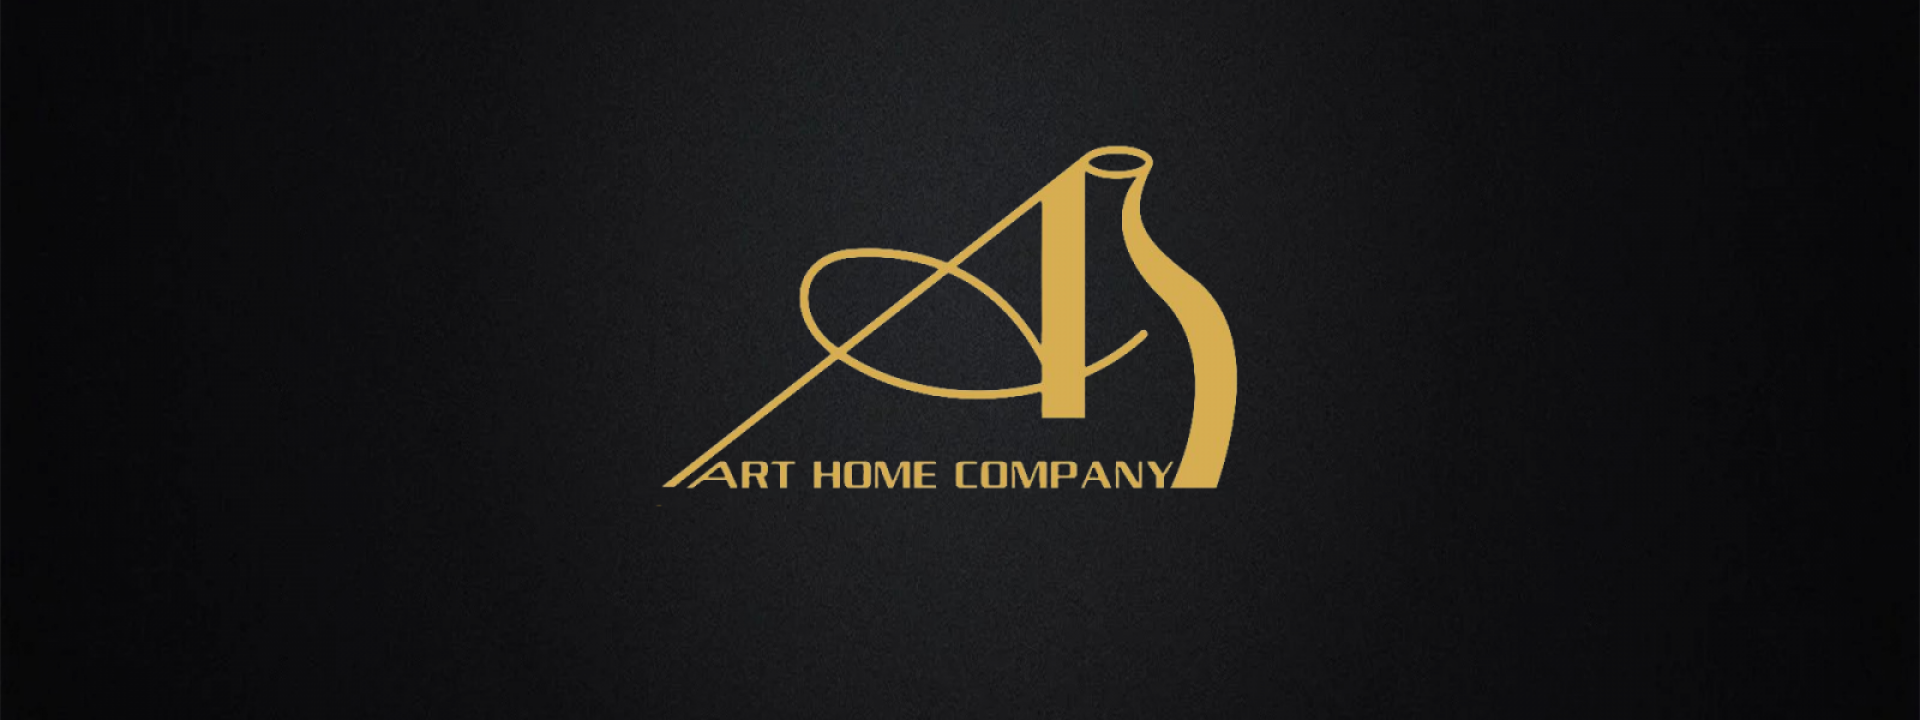 Video about Art-Home is gradually being completed.